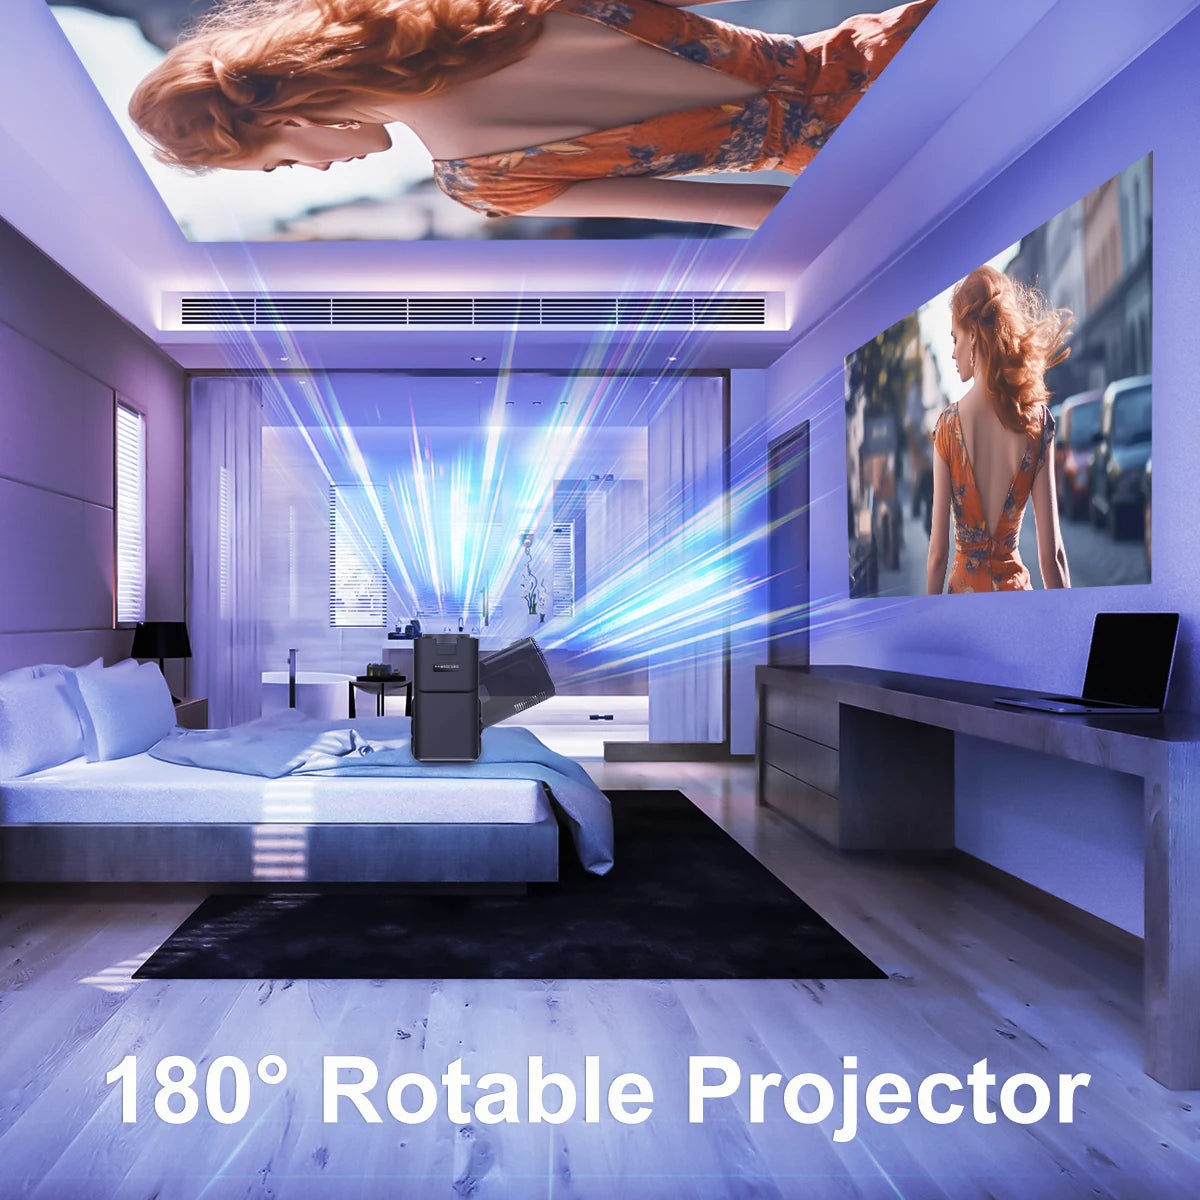 4K Android Projector, Native 1080P Resolution, Dual Wifi6 Connectivity